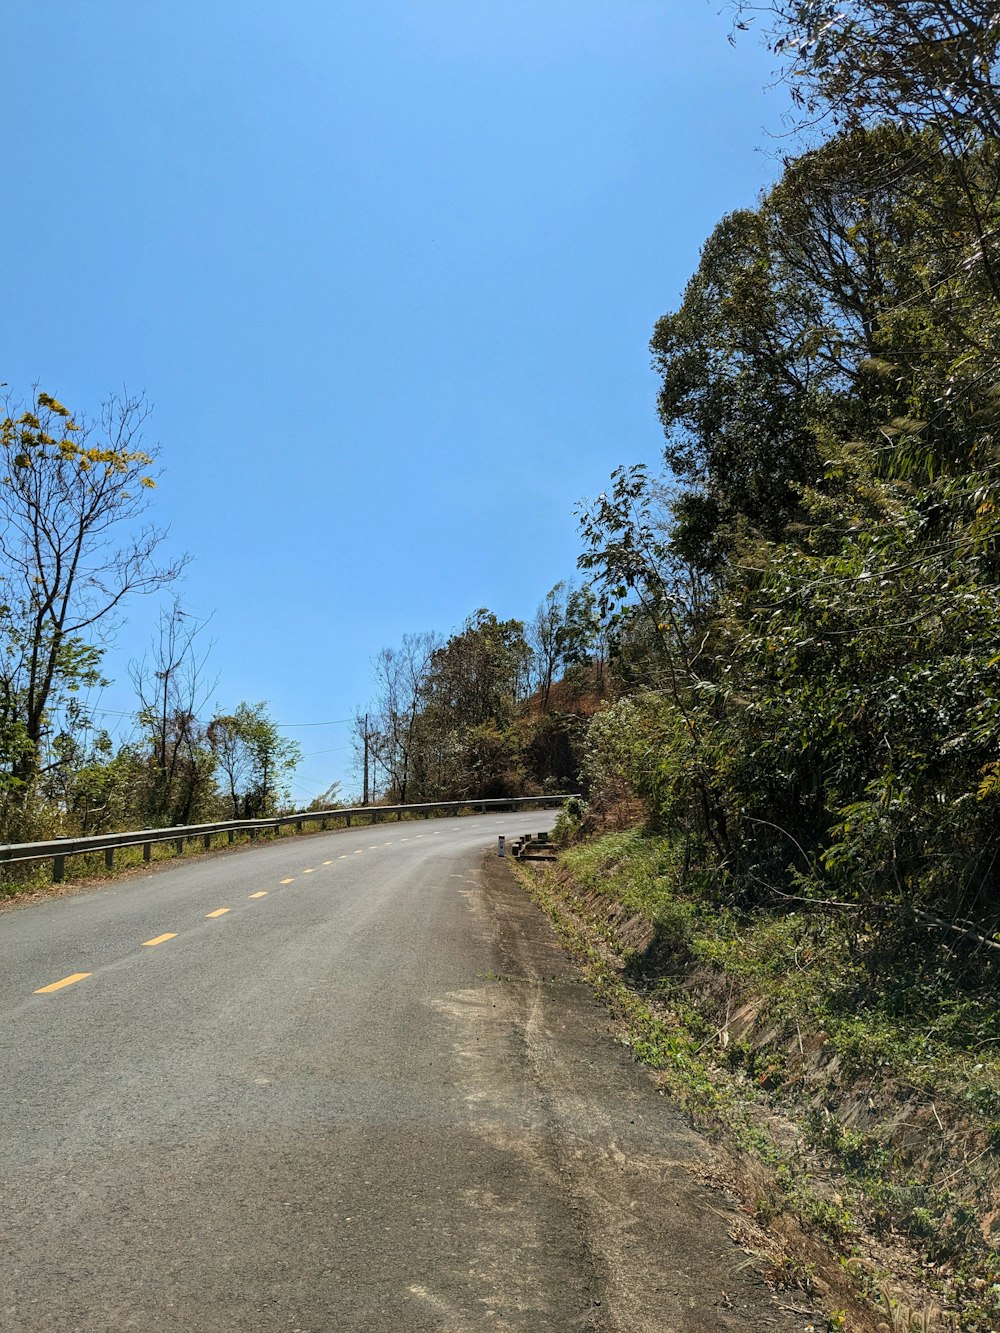 a view of a road from the side of the road